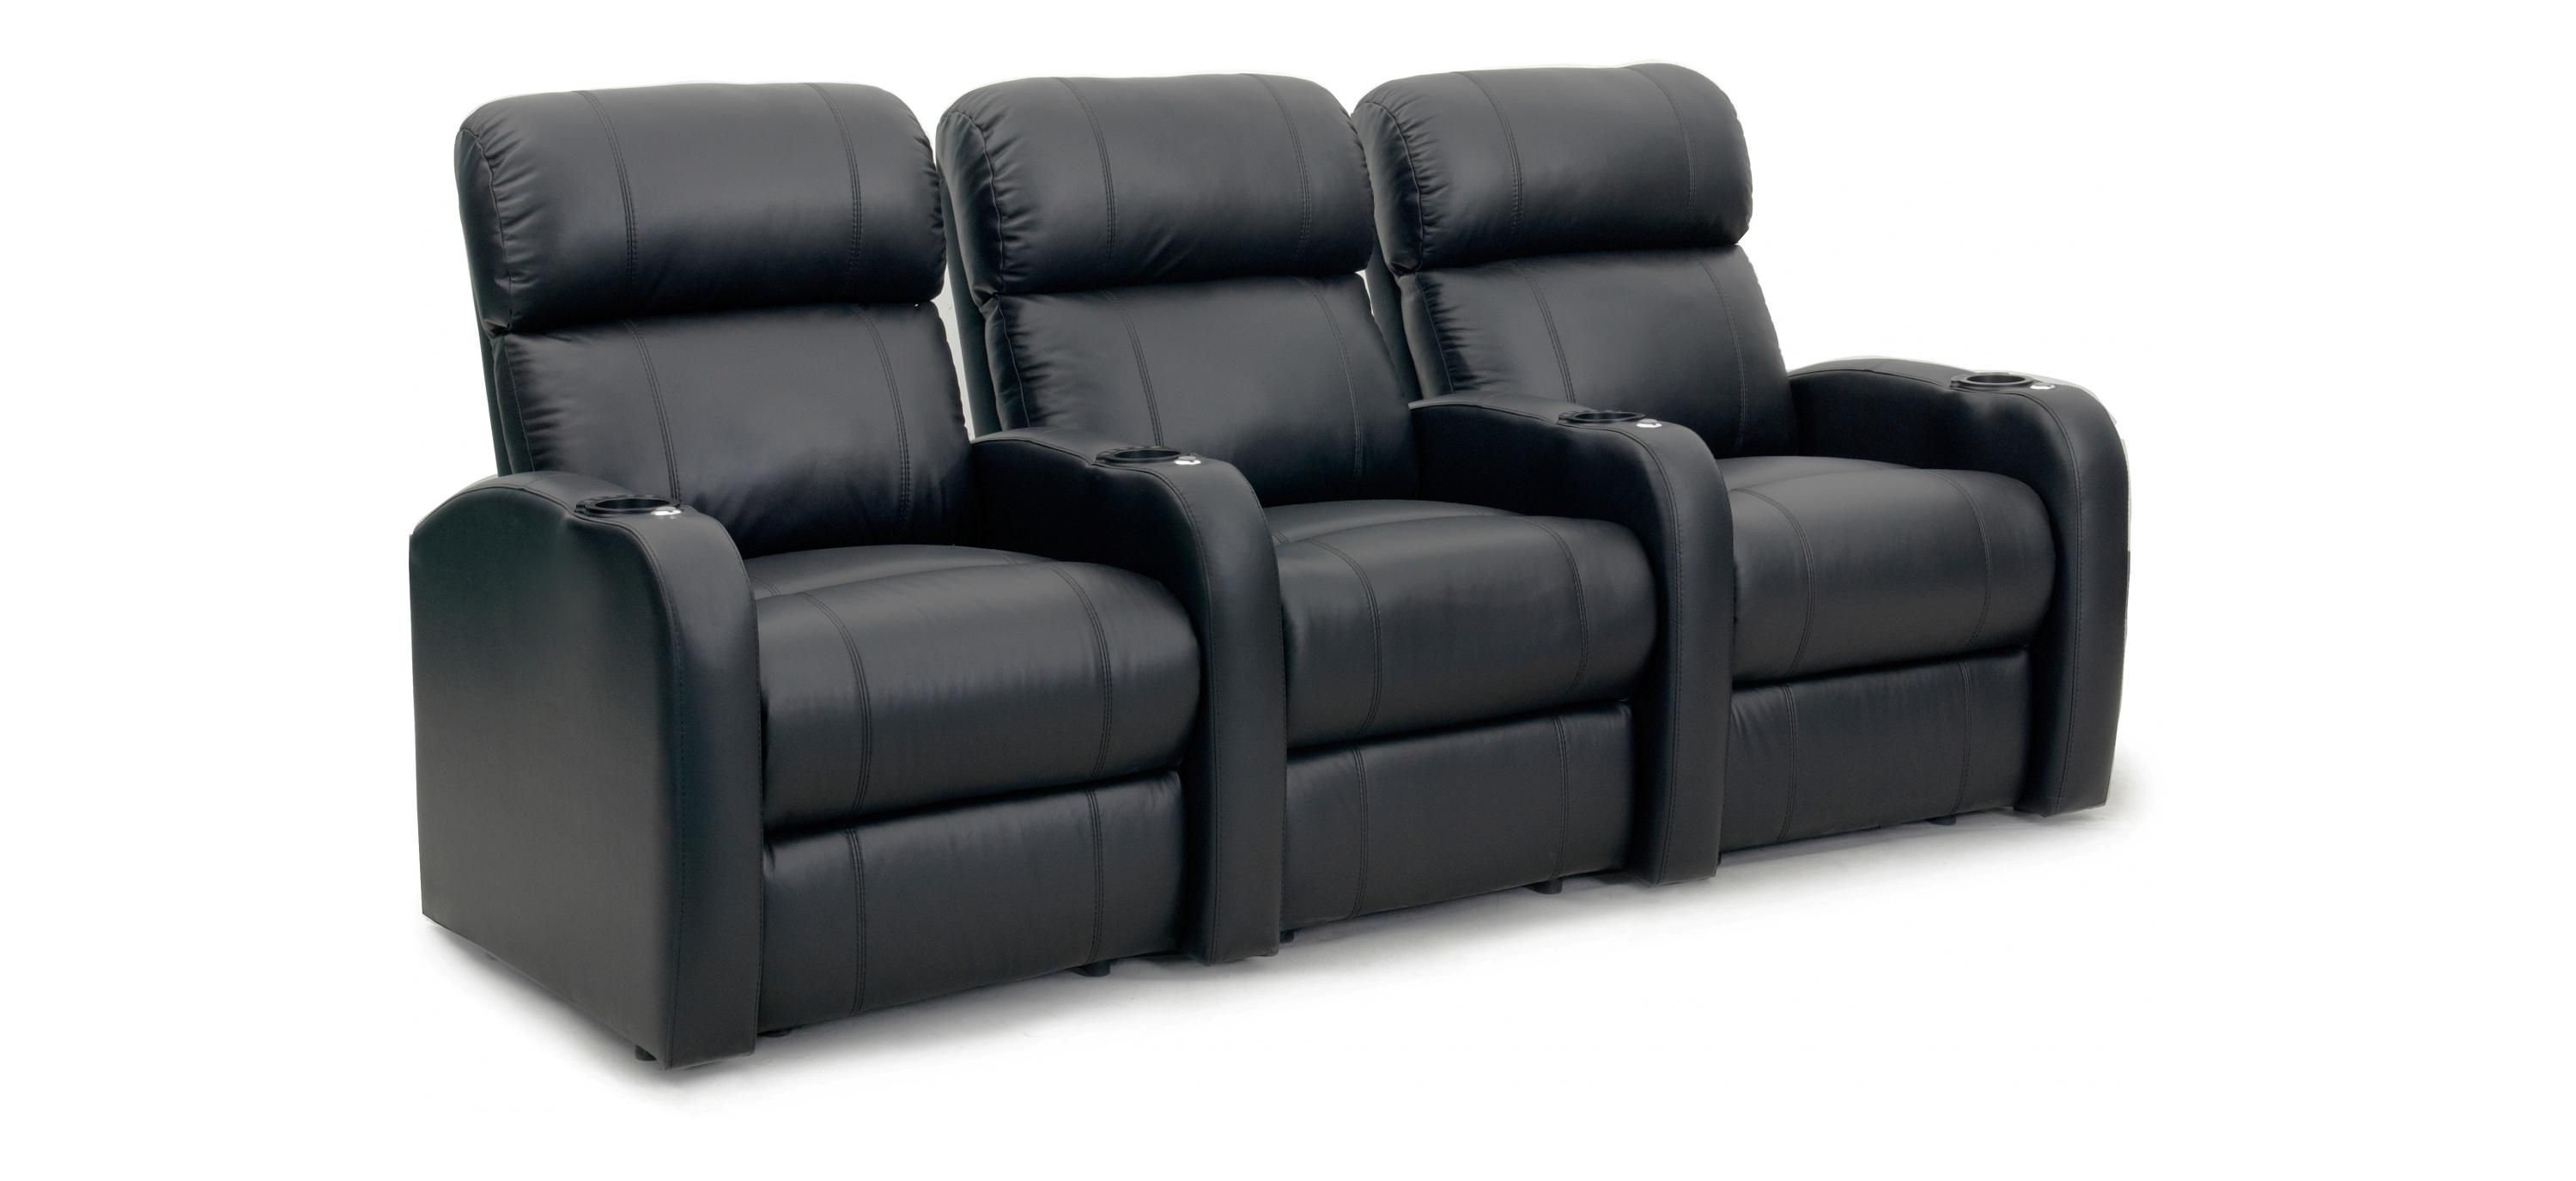 Galaxy 3-pc. Leather Reclining Sectional Sofa